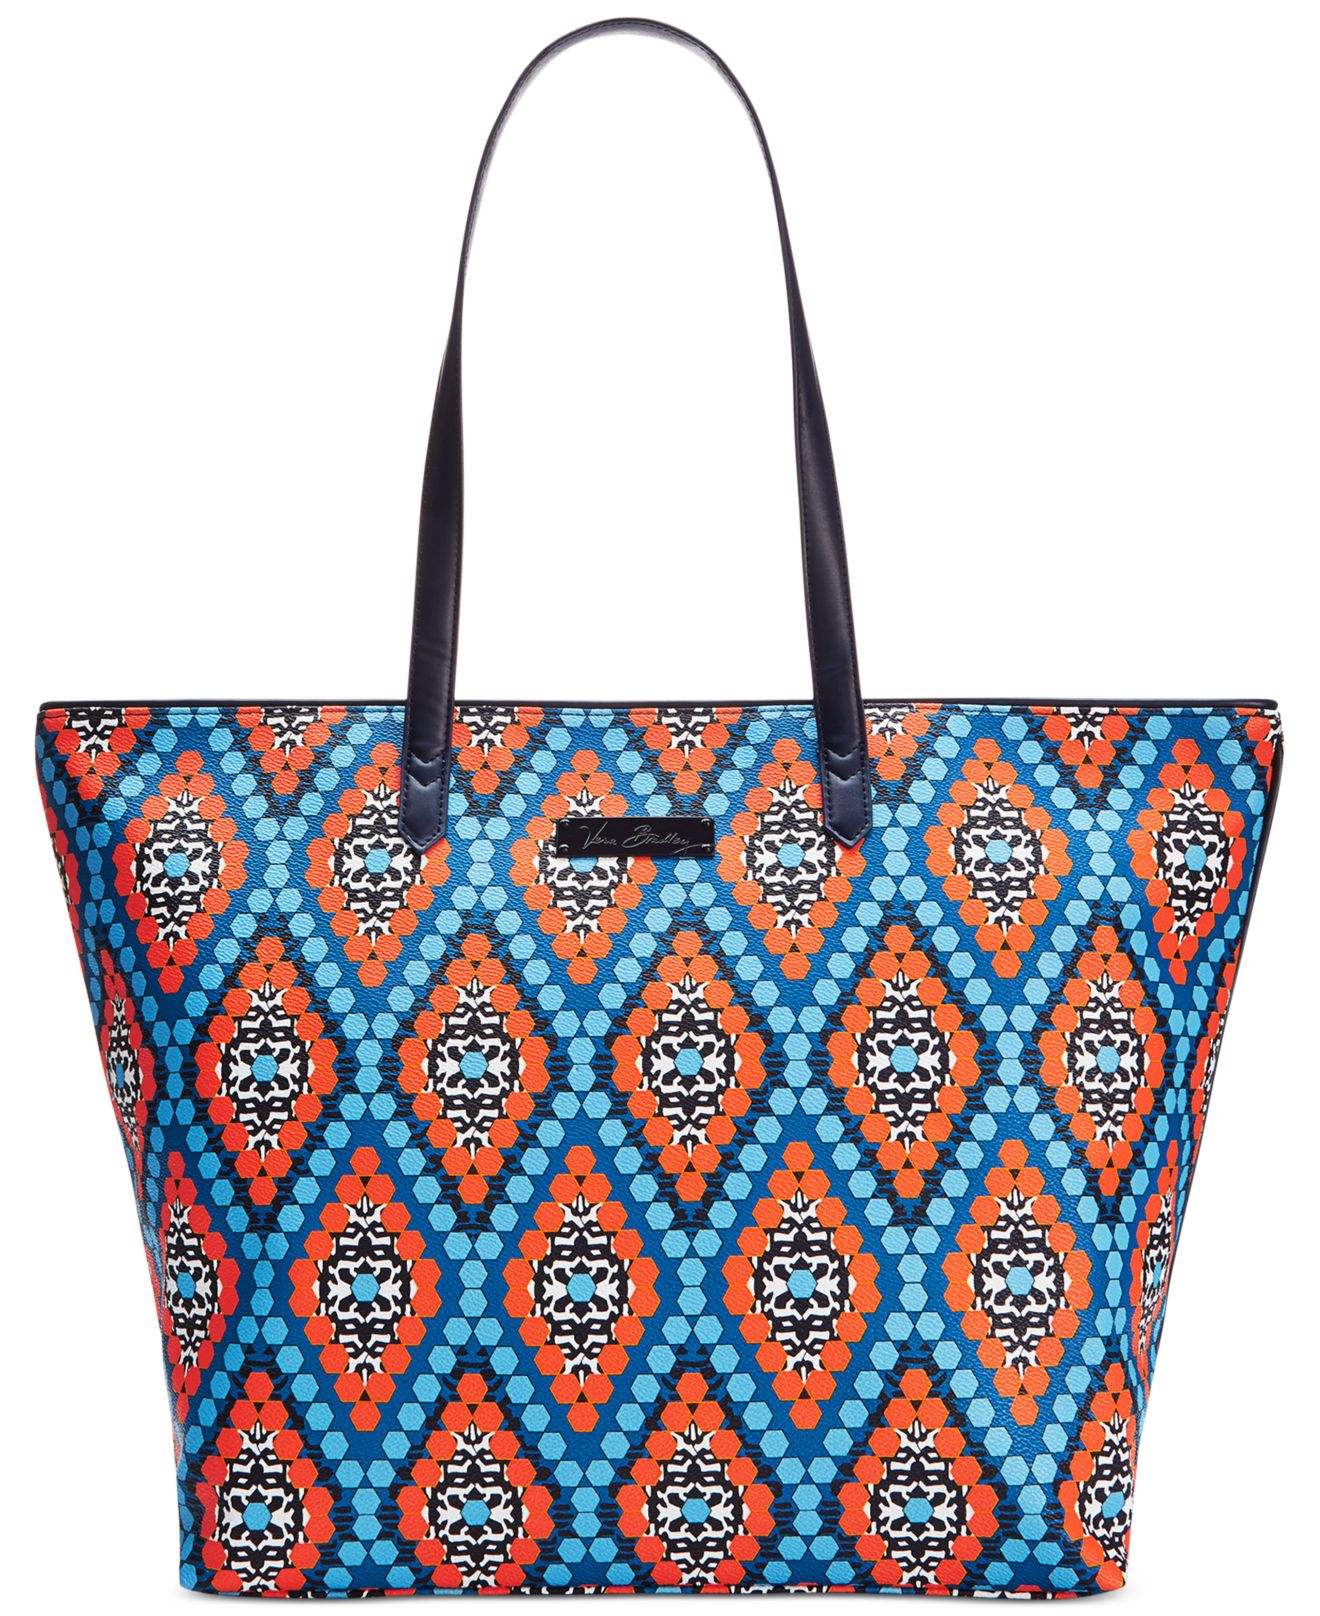 Vera Bradley Faux Leather Large Tote in Multicolor (Marrakesh Beads)